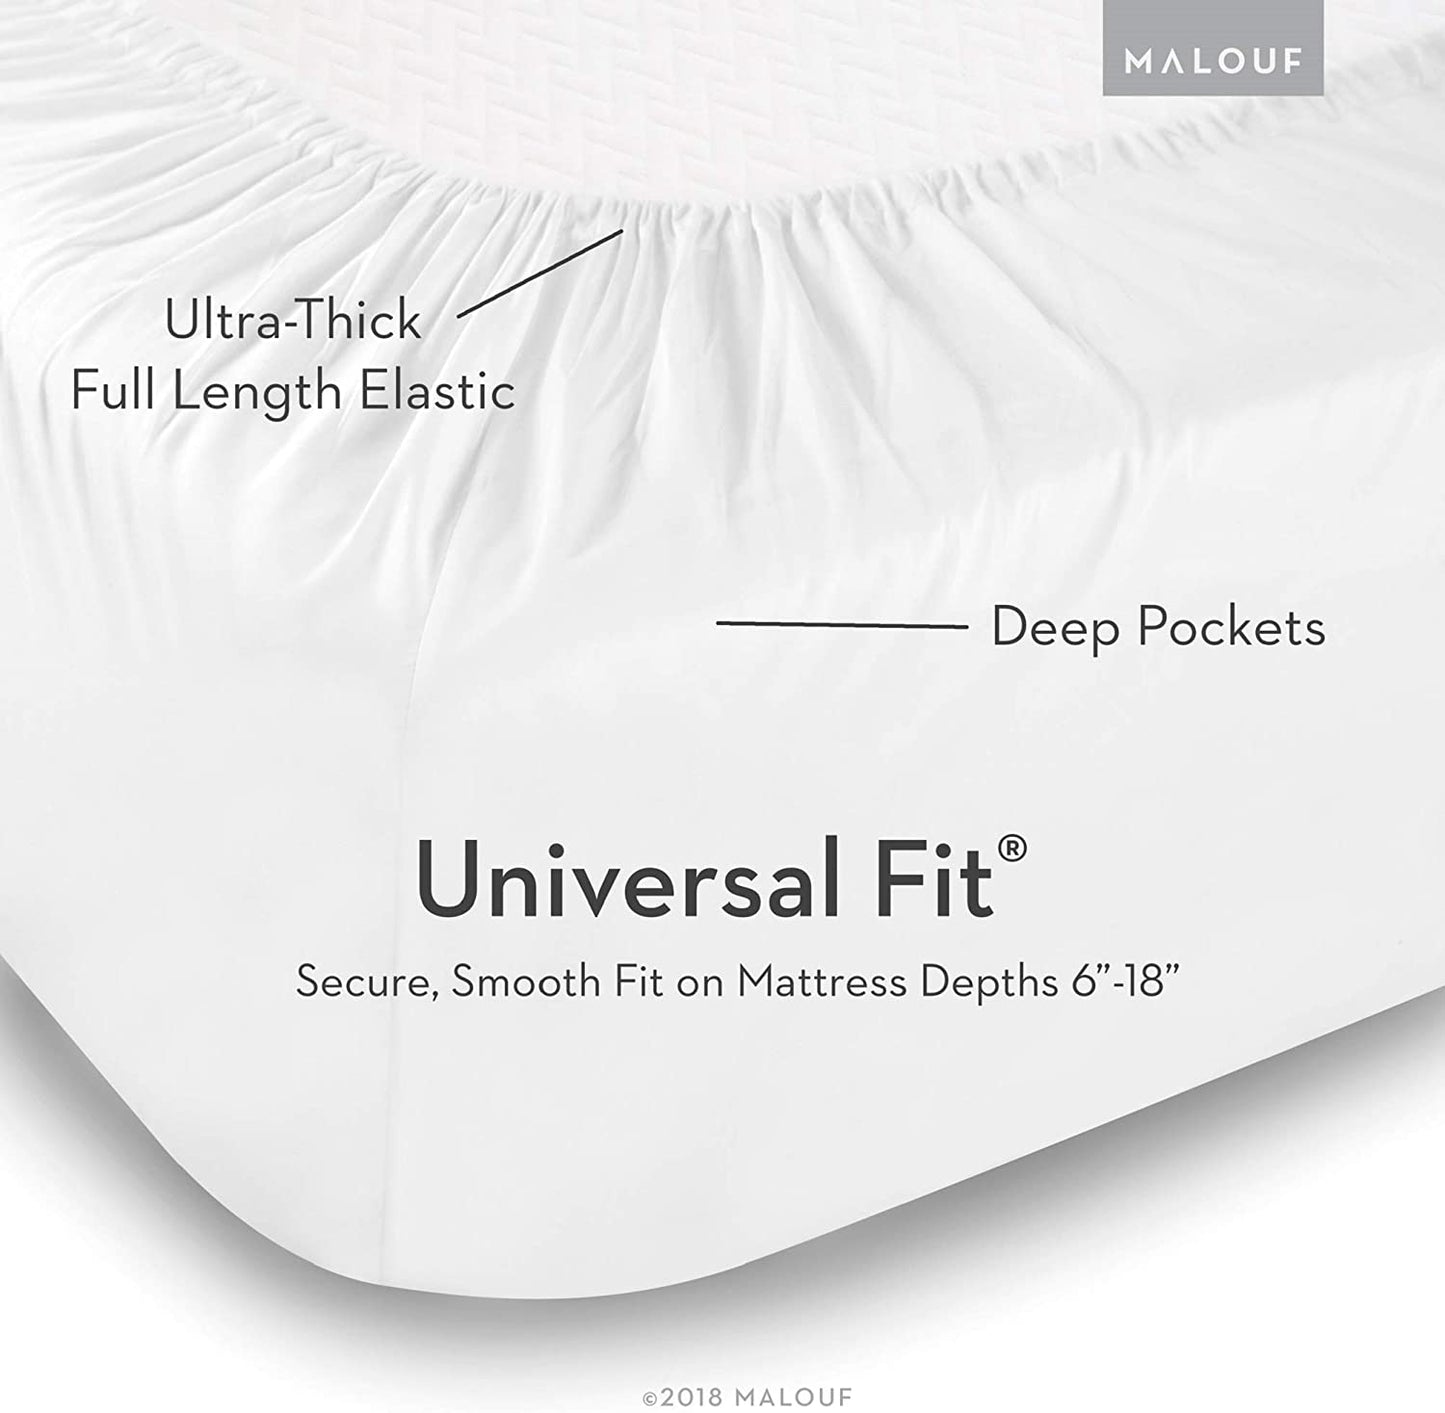 MALOUF Double Brushed Microfiber Super Soft Luxury Bed Sheet Set - Wrinkle Resistant - Queen Size - White